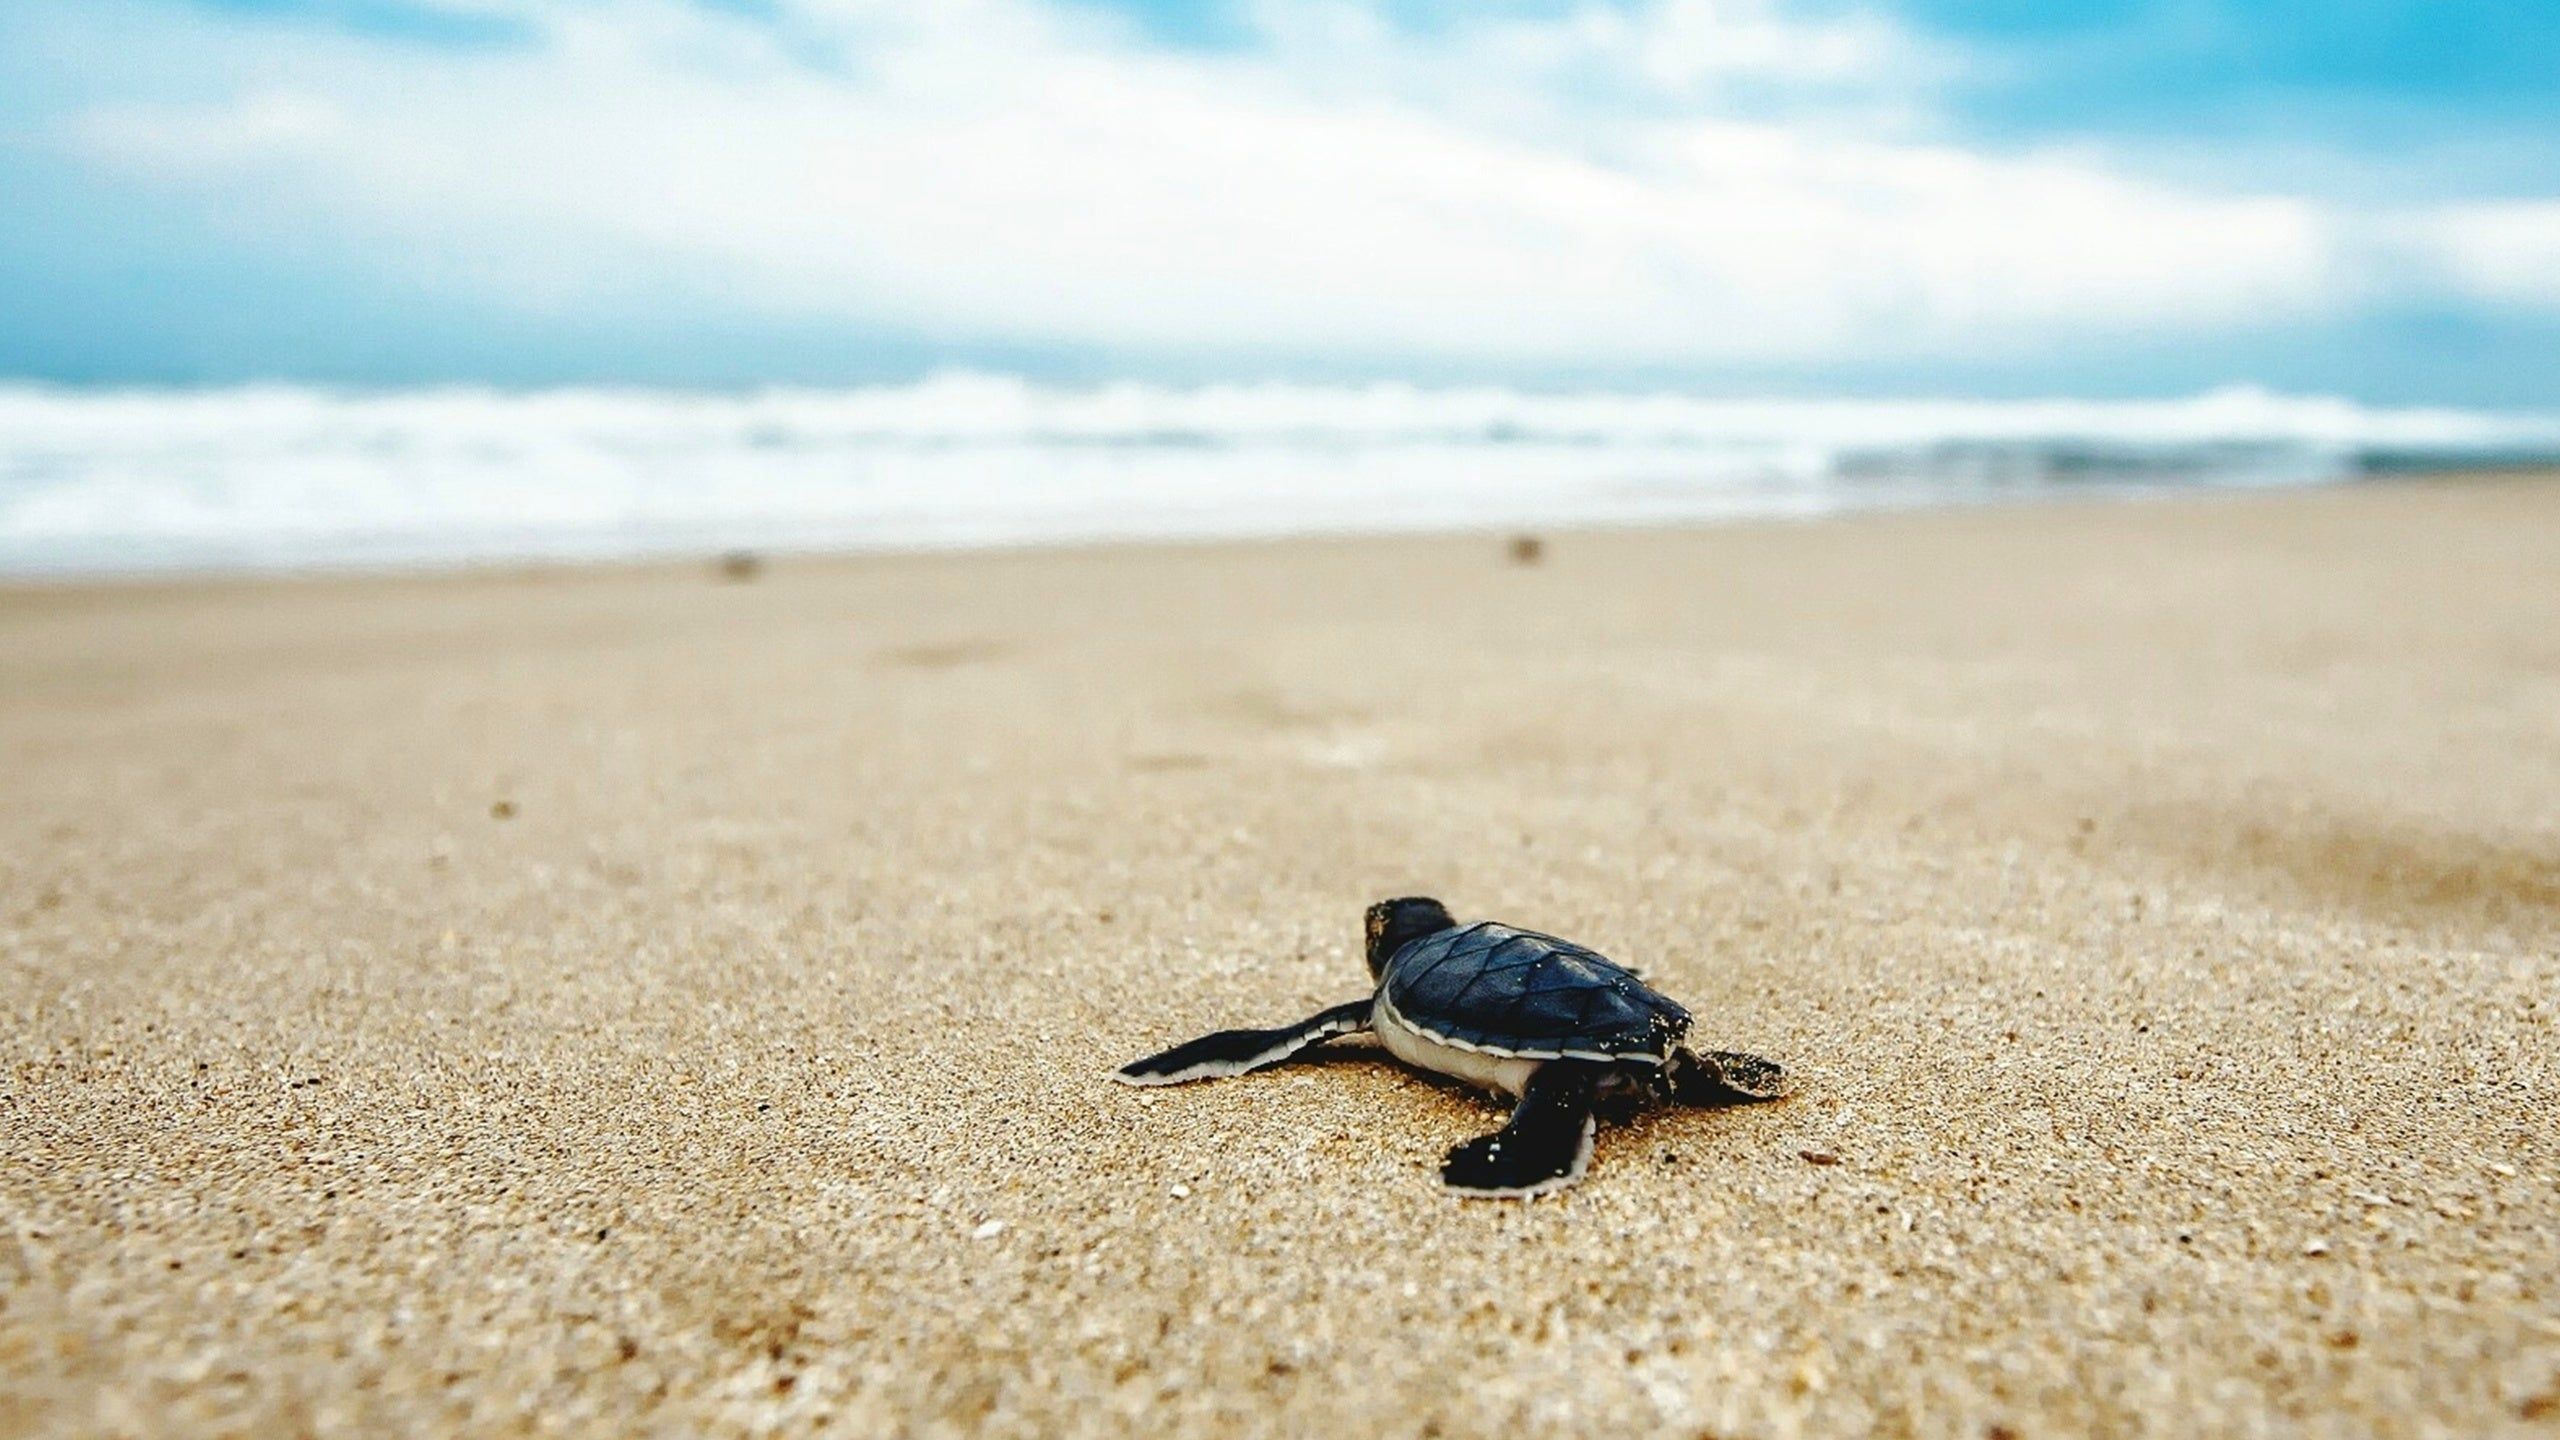 A baby turtle on the beach - Turtle, sea turtle